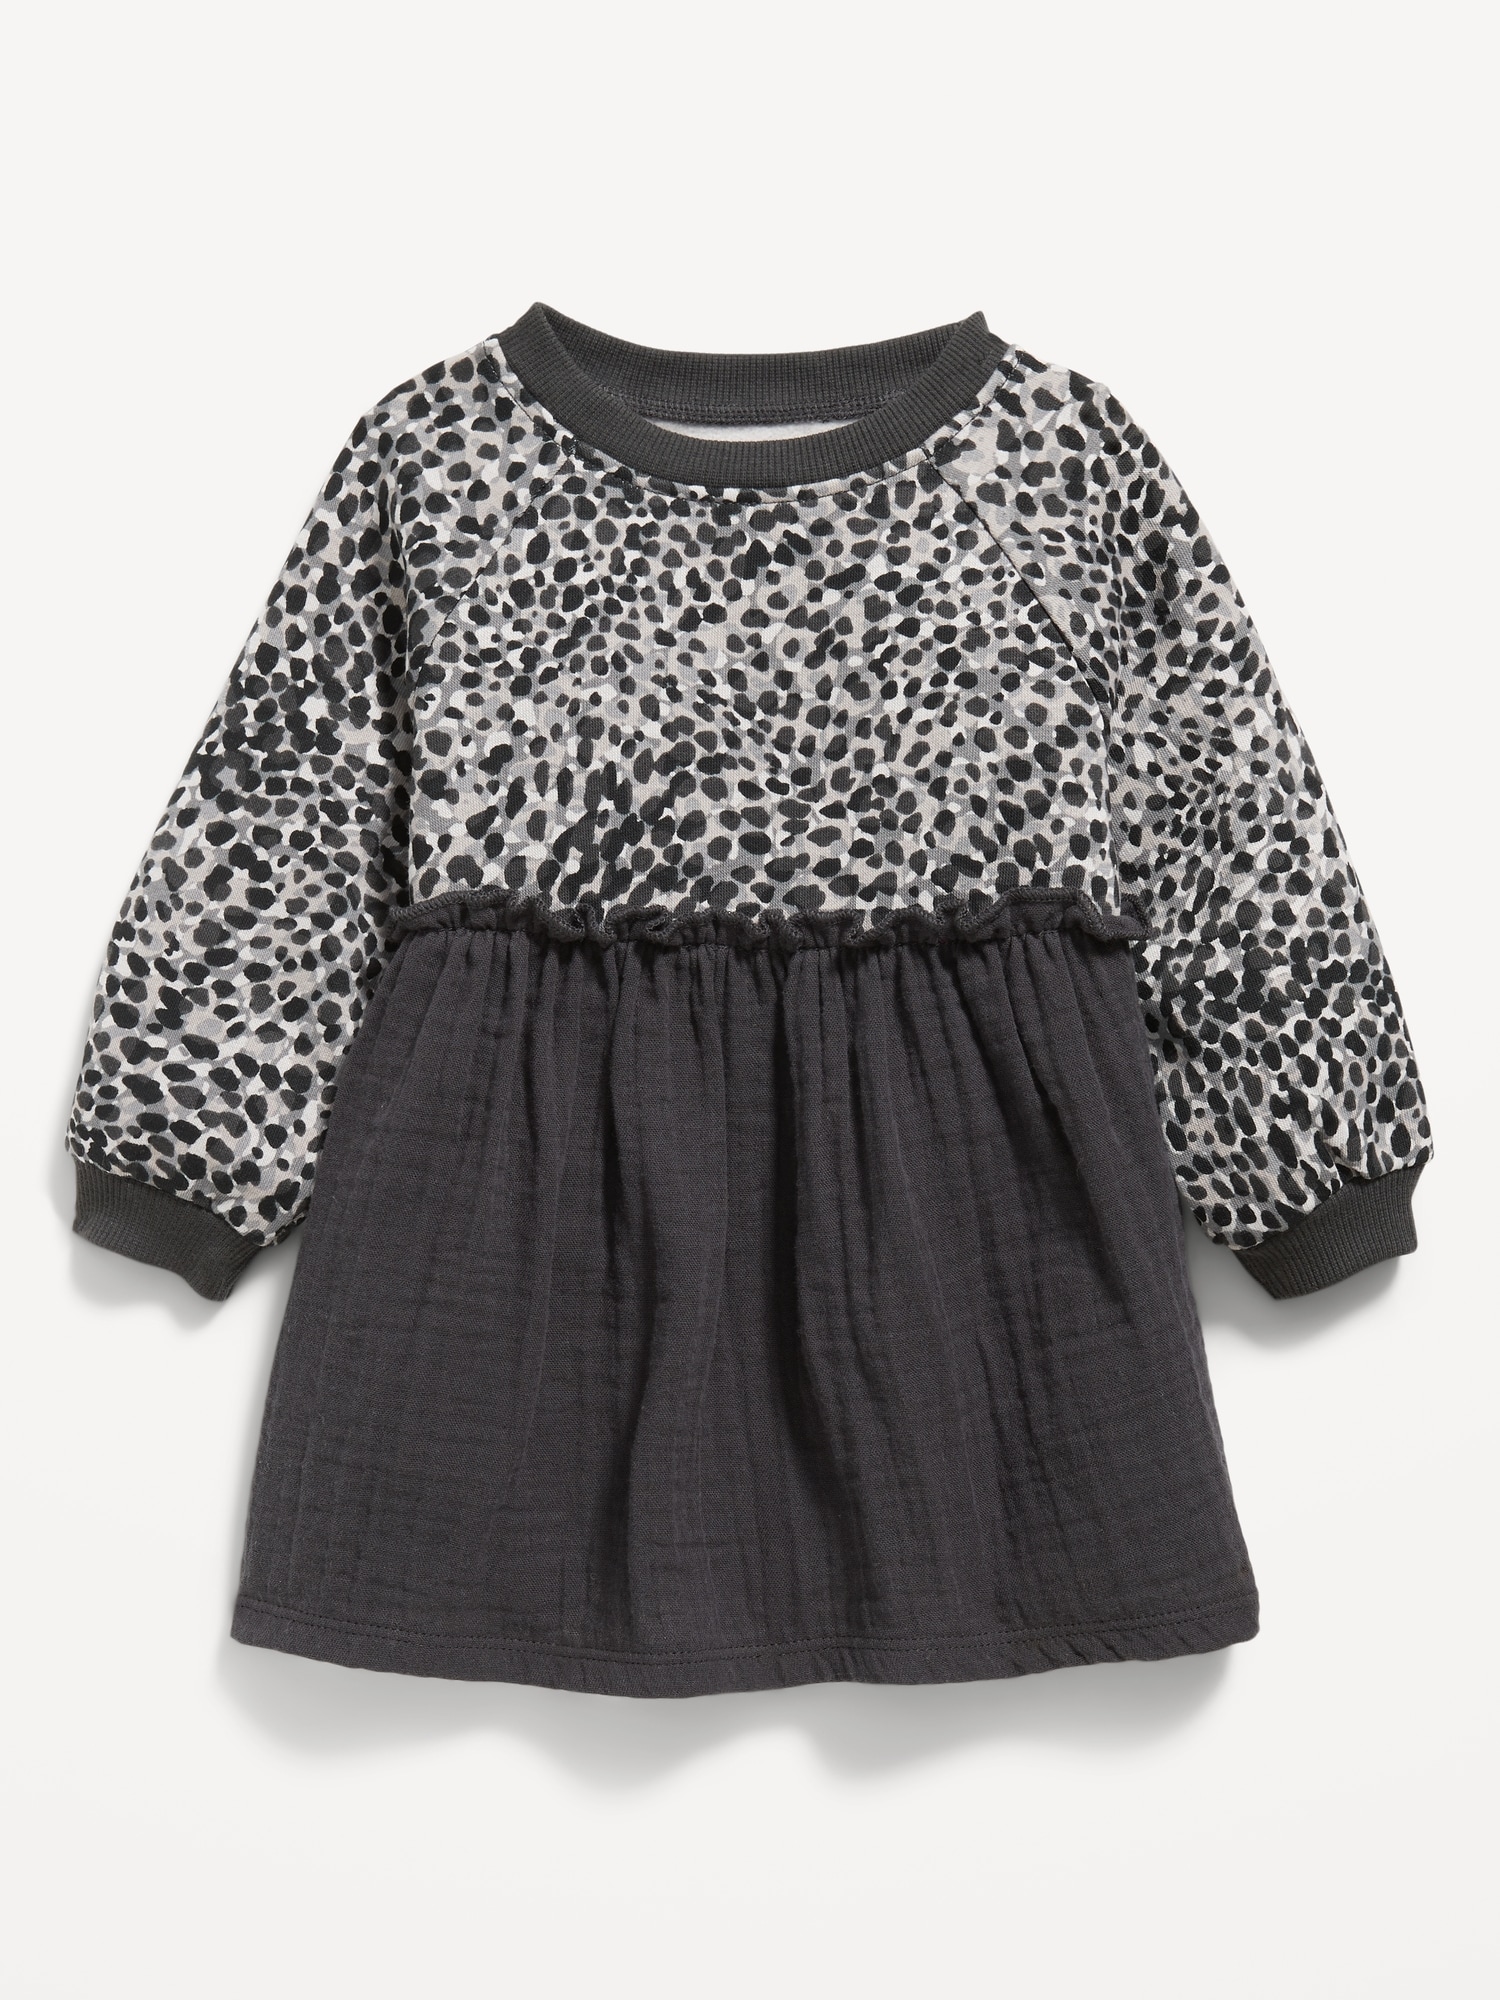 Long-Sleeve Printed Textured Ruffle-Trim Dress for Baby